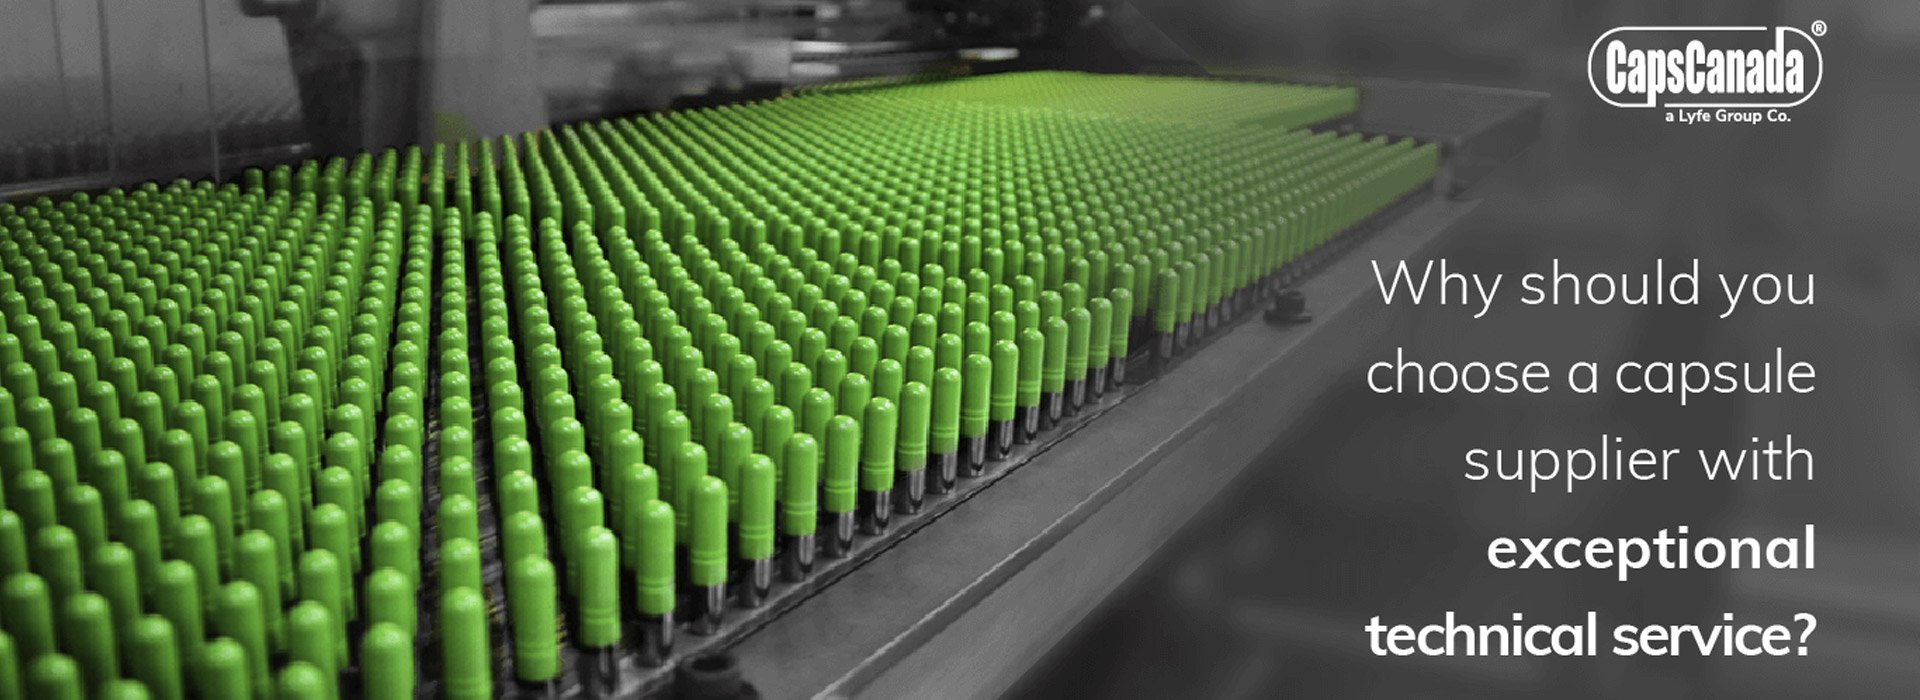 Why should a capsule manufacturer choose a supplier with exceptional technical service?